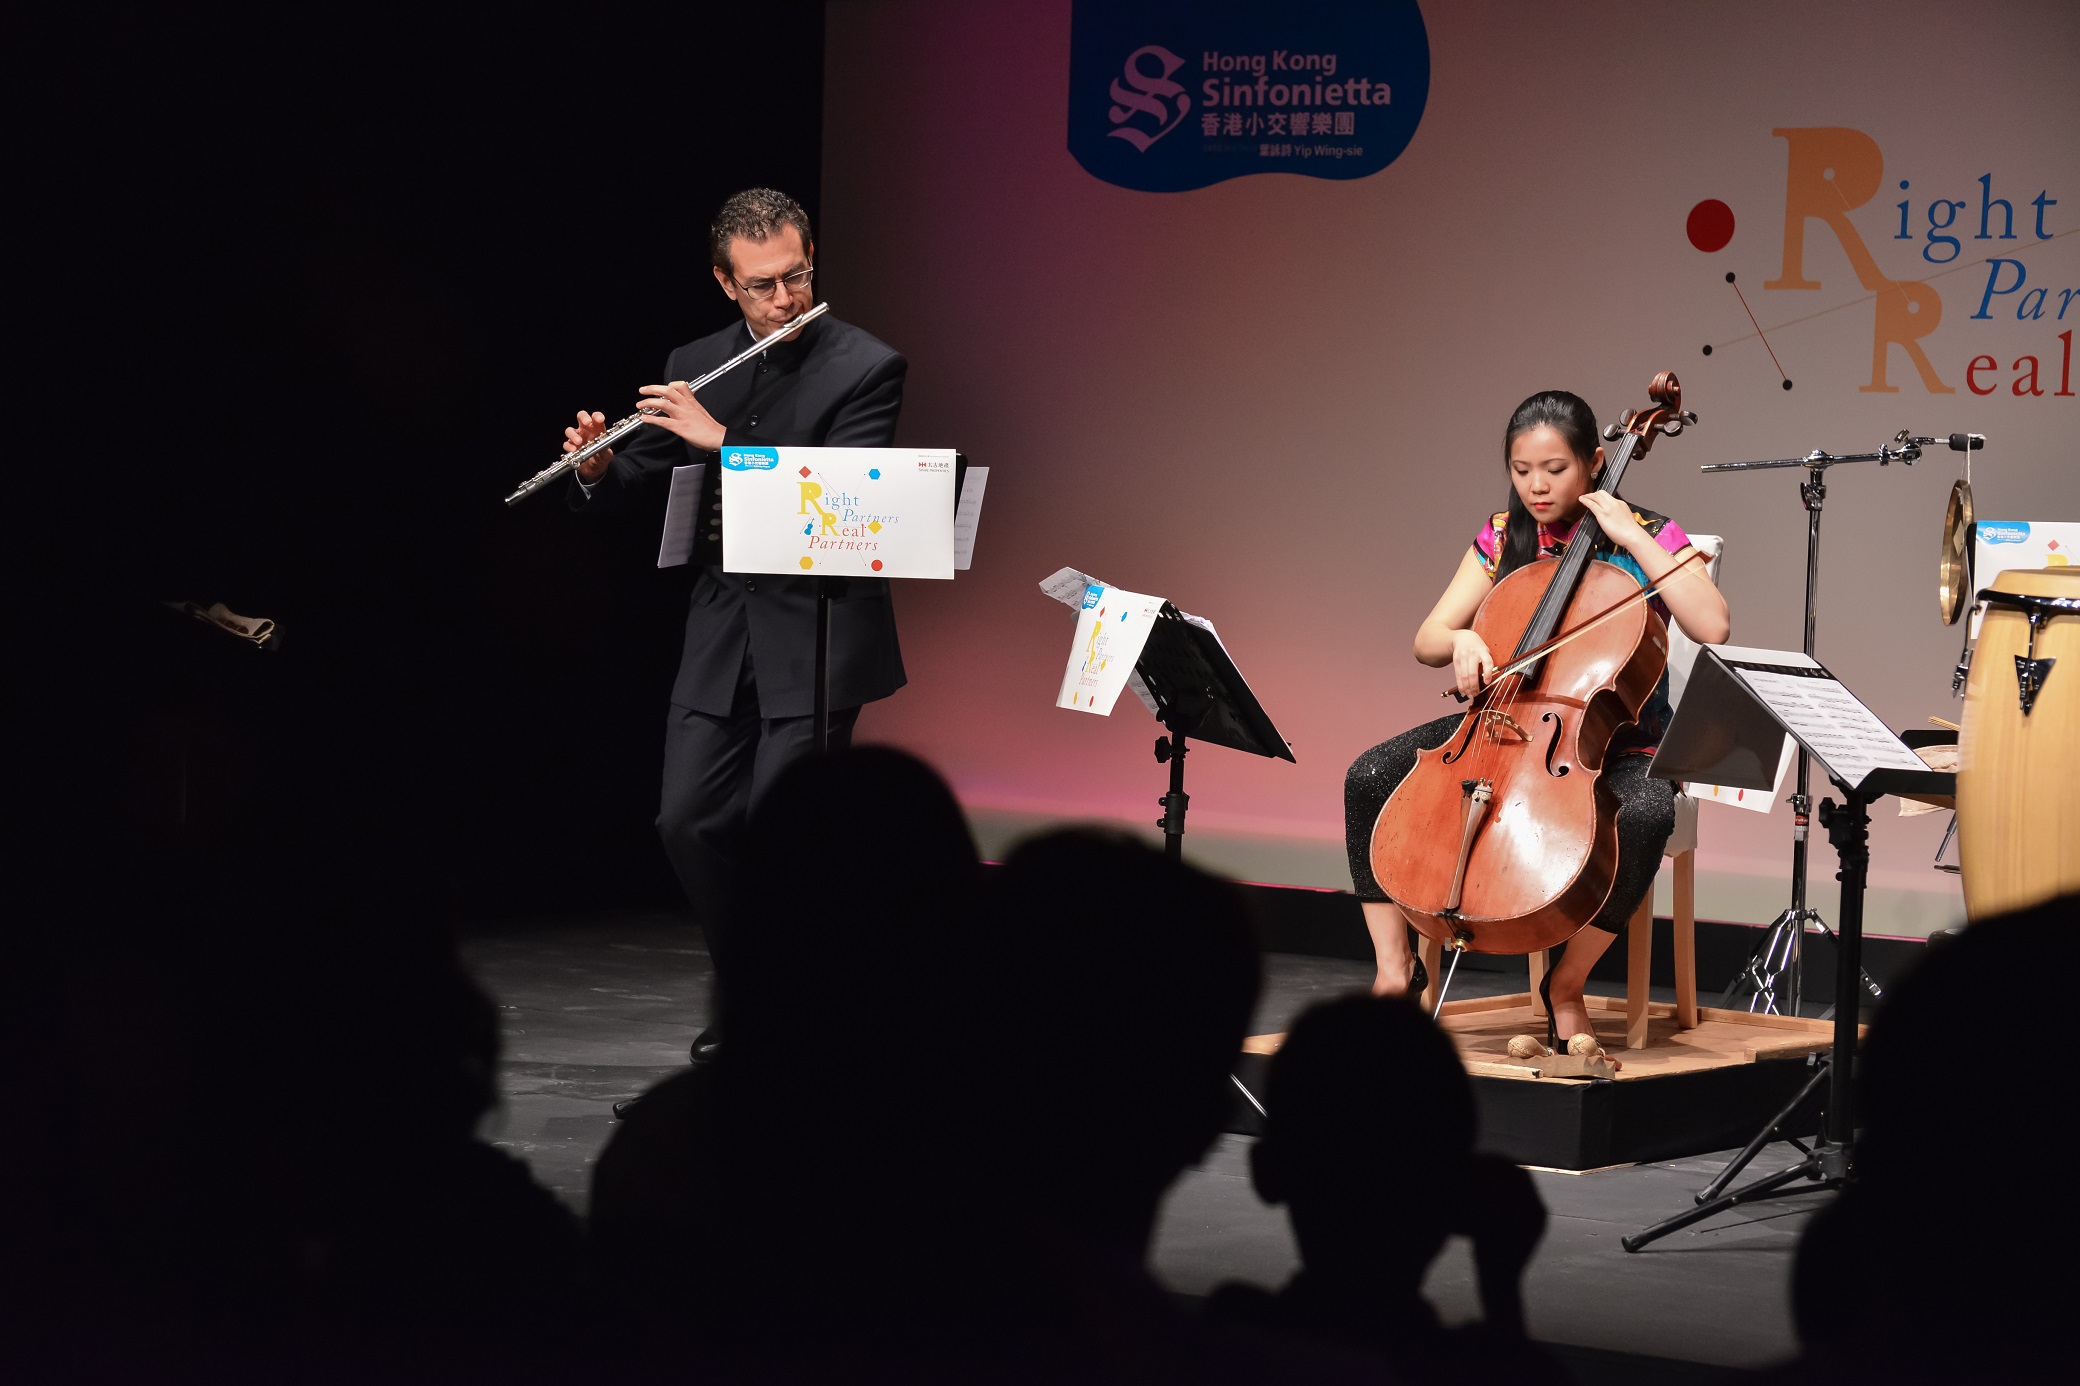 Hong Kong Sinfonietta joined the ArtisTree programme to offer the community music performances.